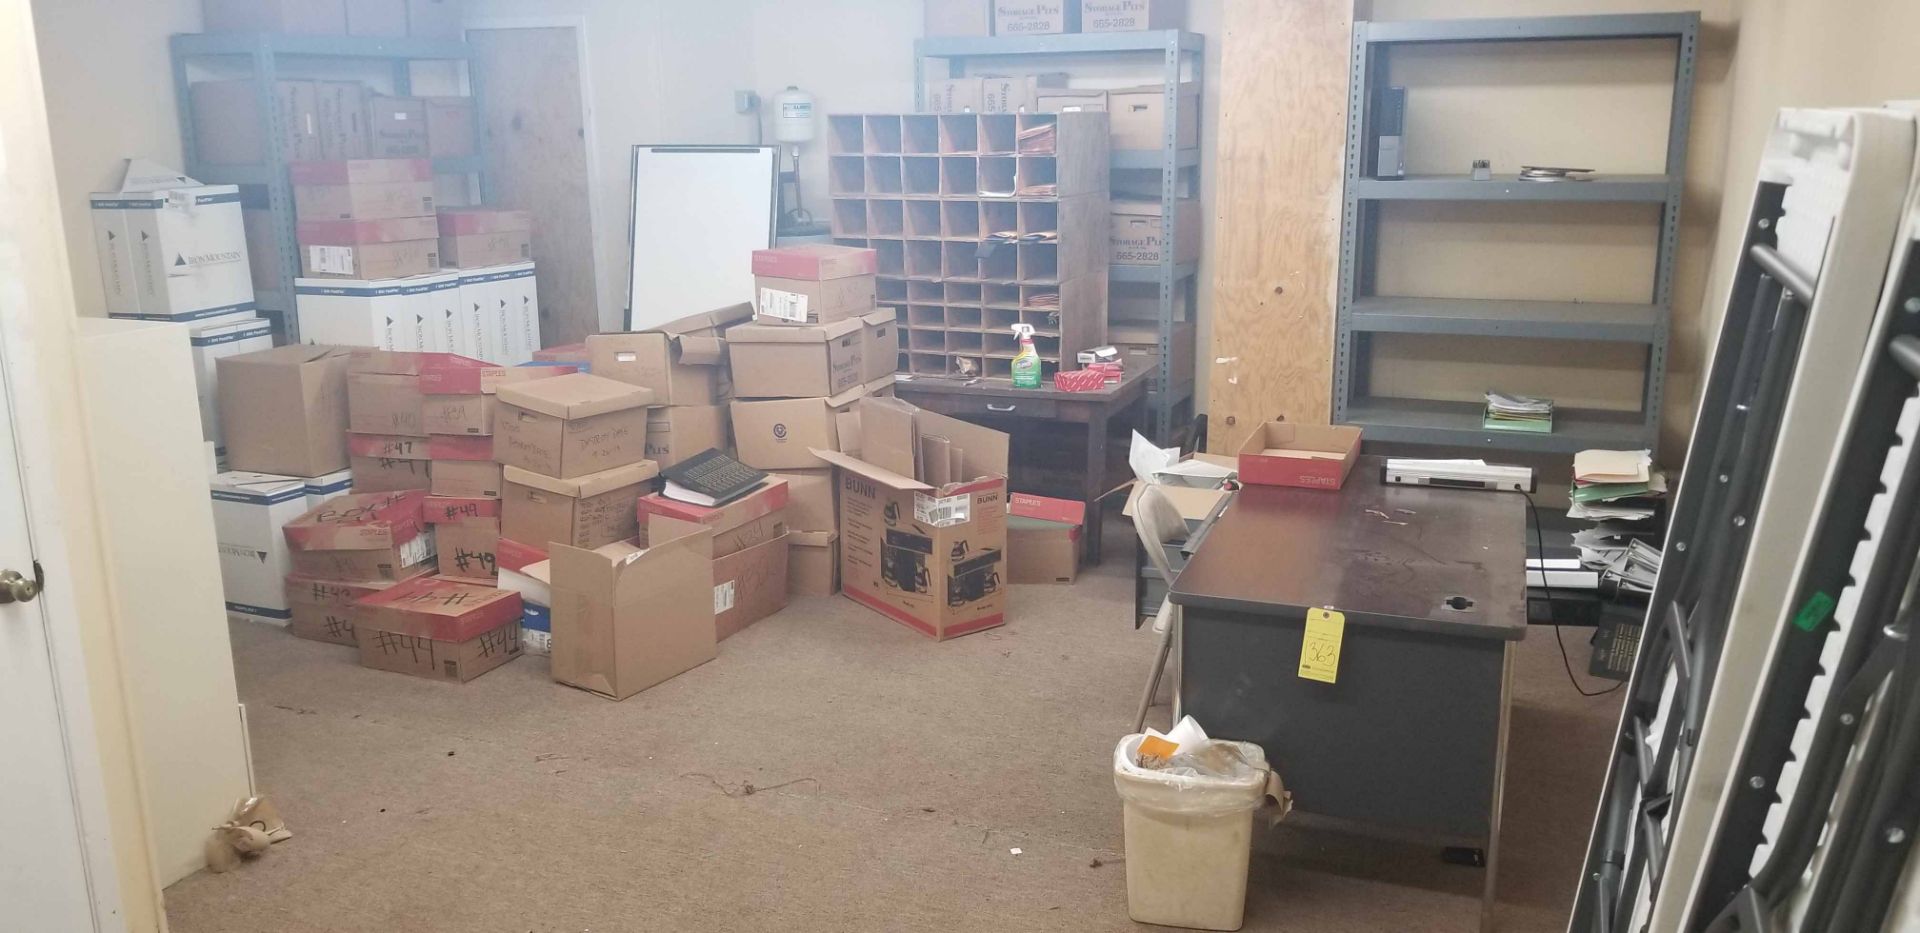 CONTENTS OF OFFICE: (2) DESKS, (2) LATERAL FILE CABINETS, SMALL DRY ERASE BOARD, (2) PLASTIC